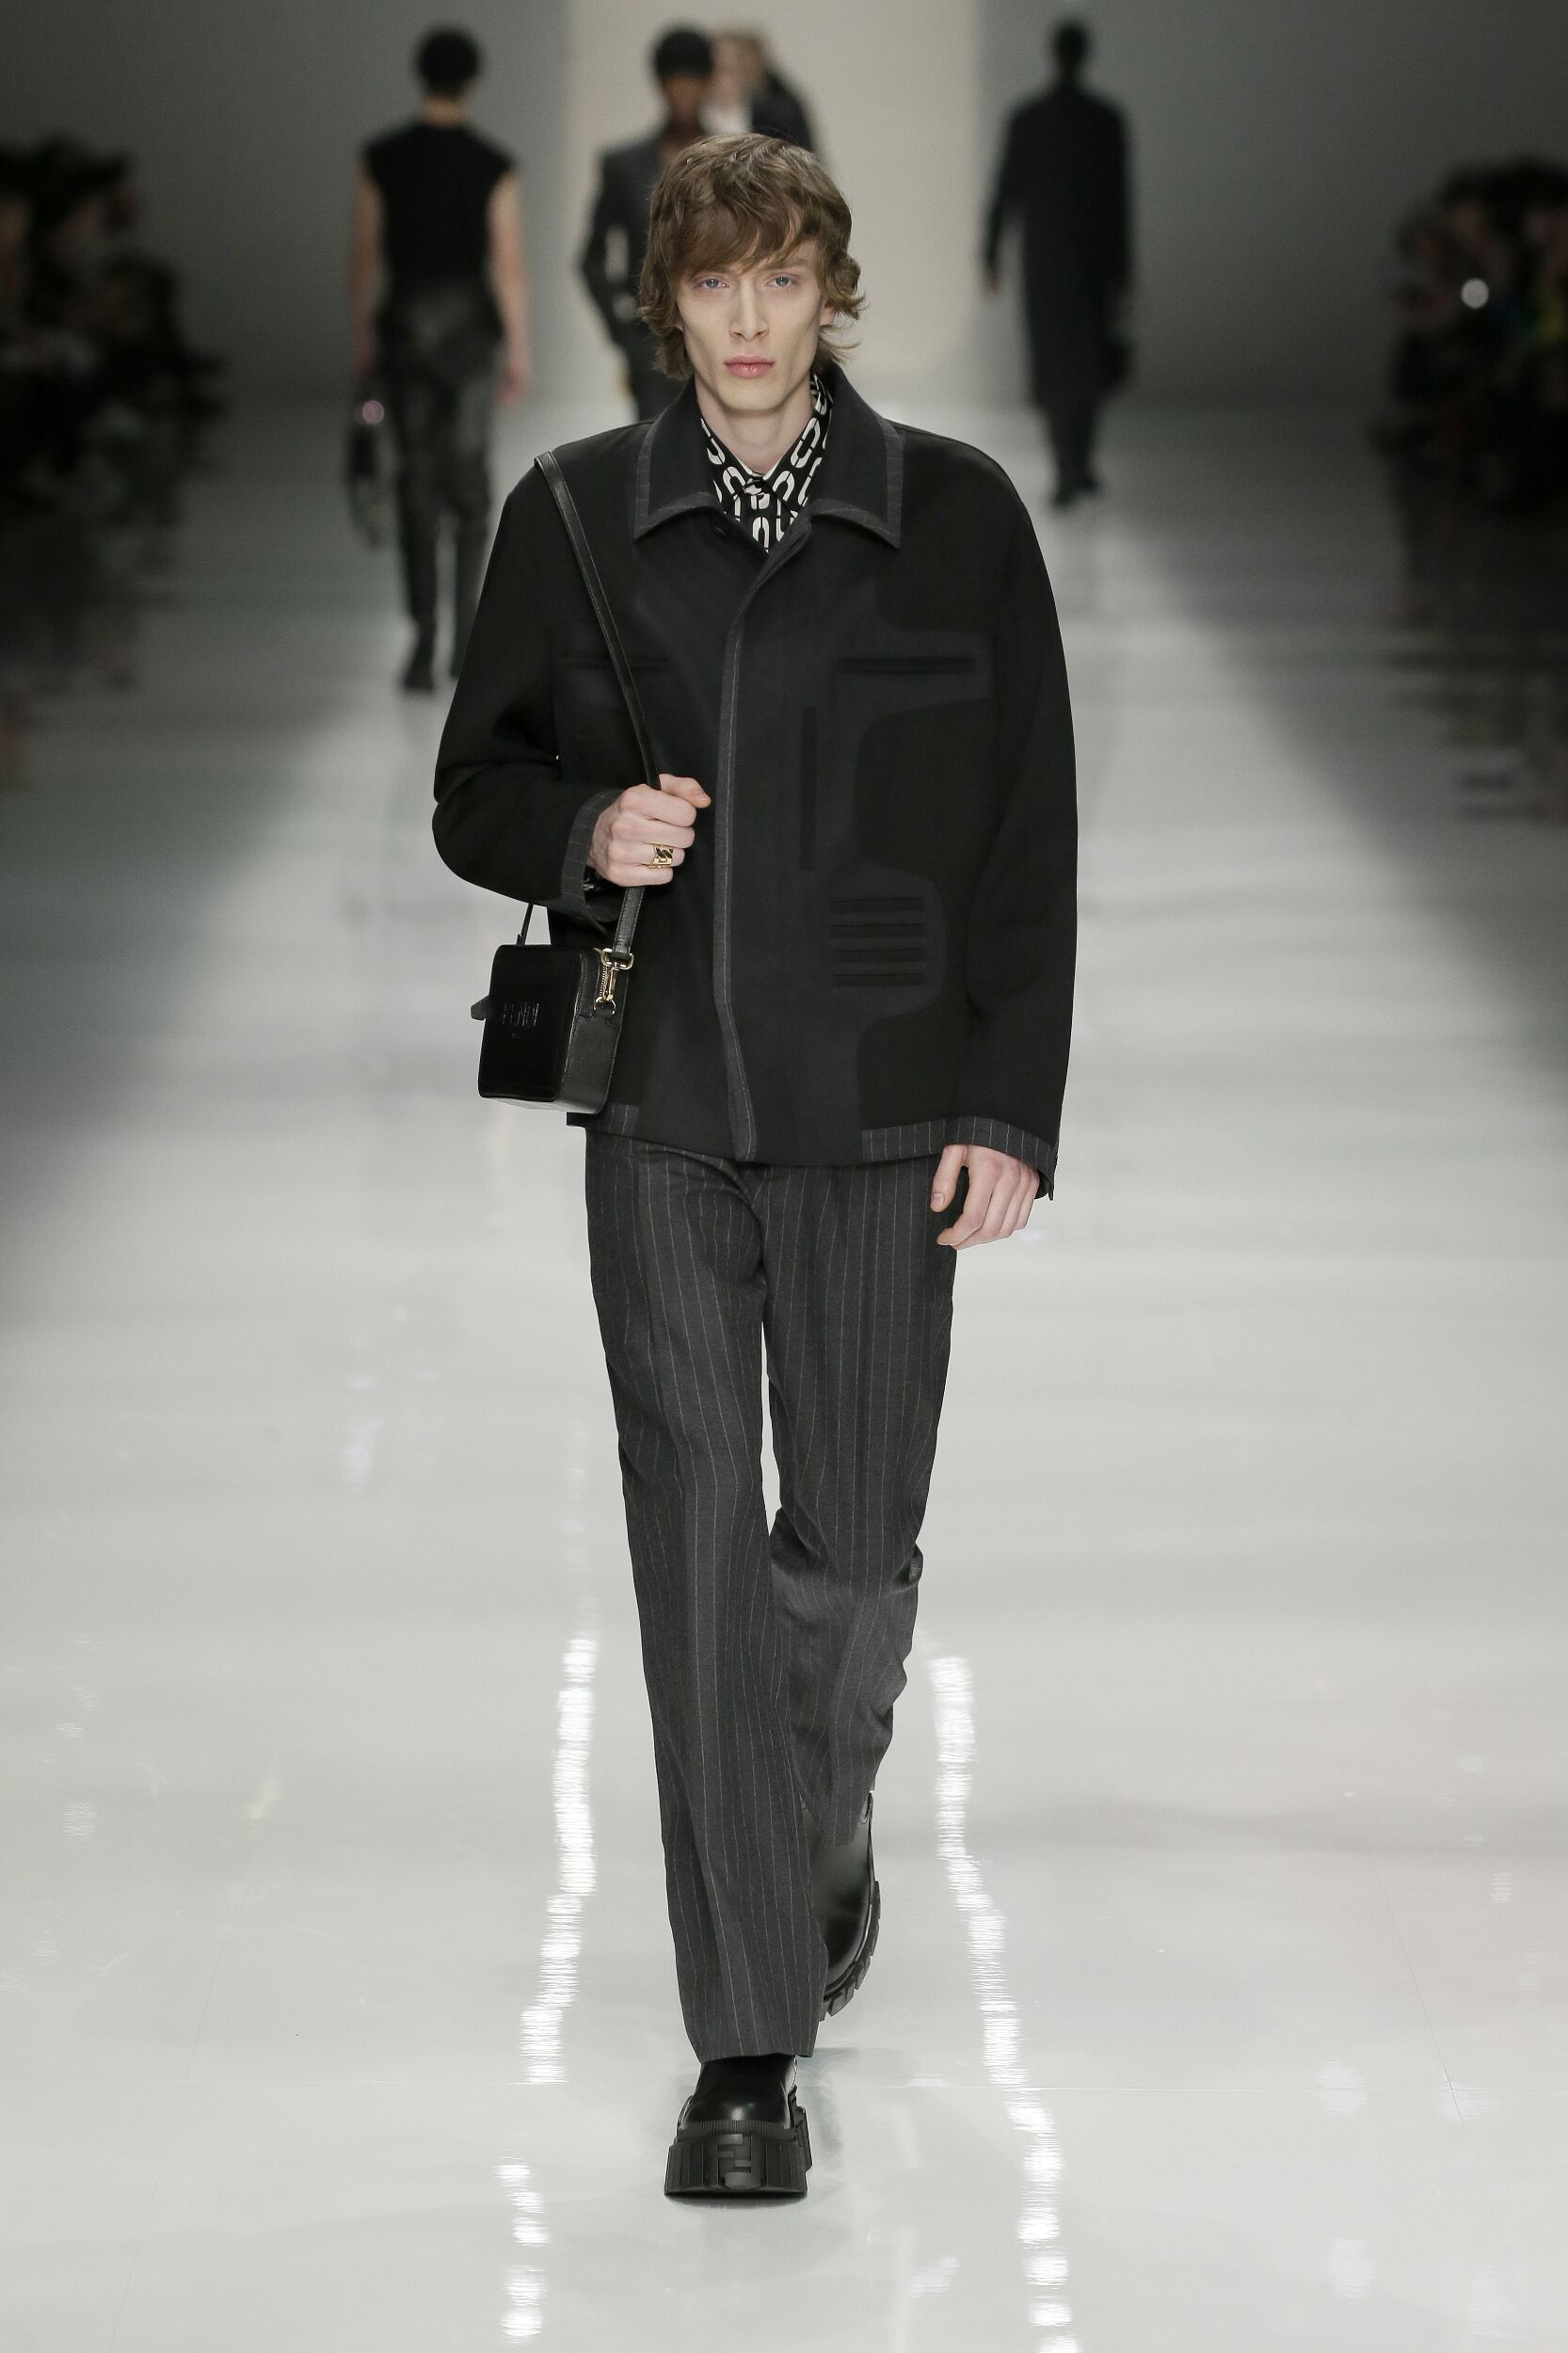 FENDI FALL WINTER 2020 MEN'S COLLECTION | The Skinny Beep